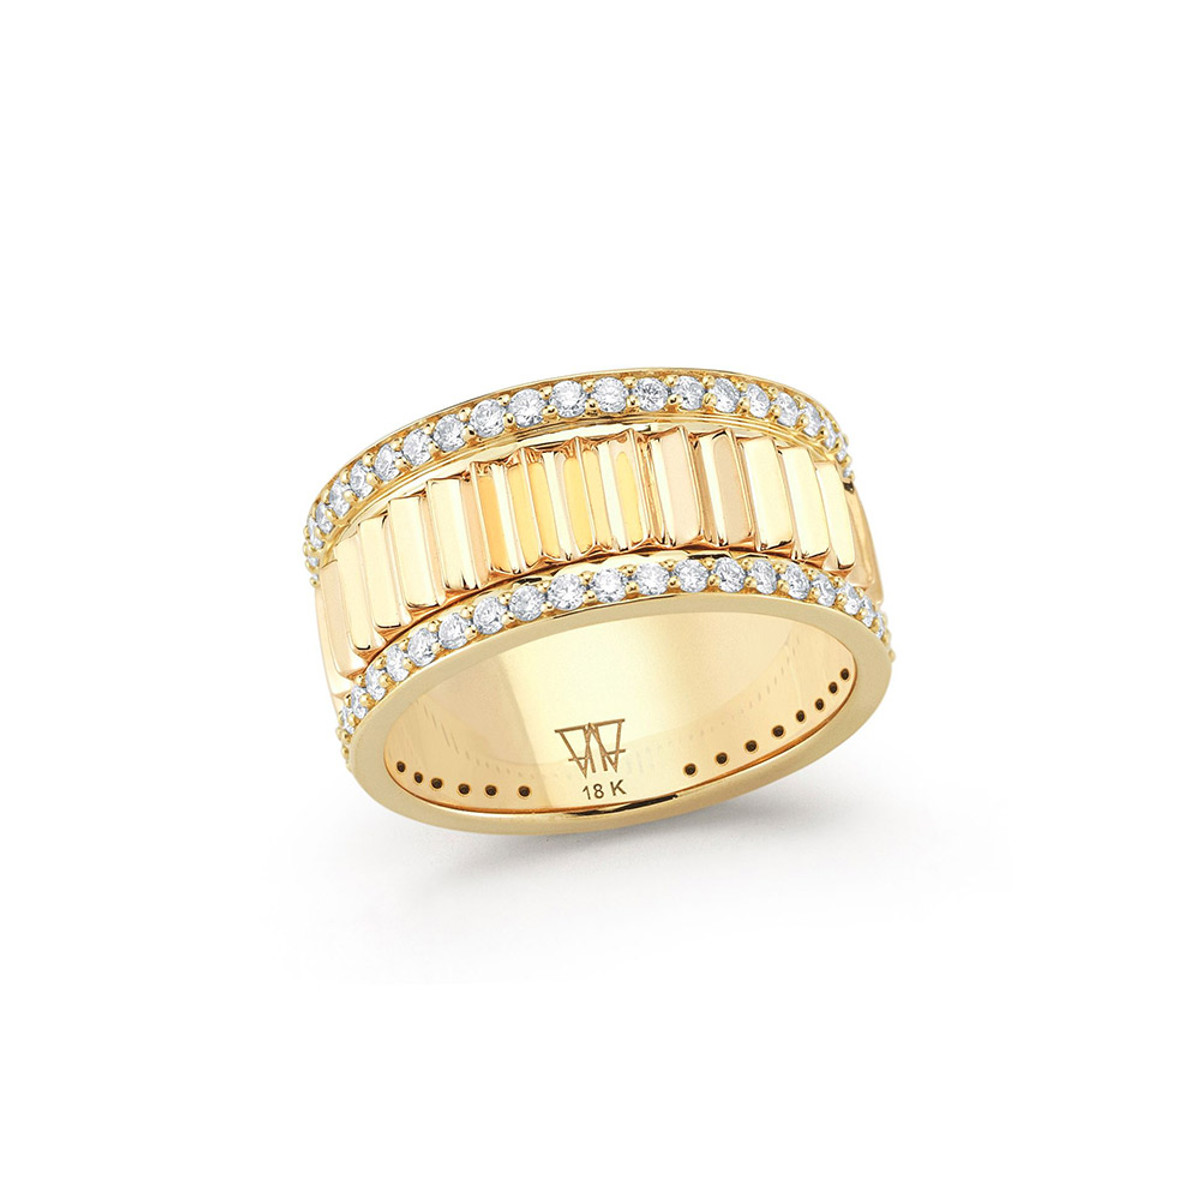 Walters Faith Clive 18K Yellow Gold and Diamond Fluted Ring-56169